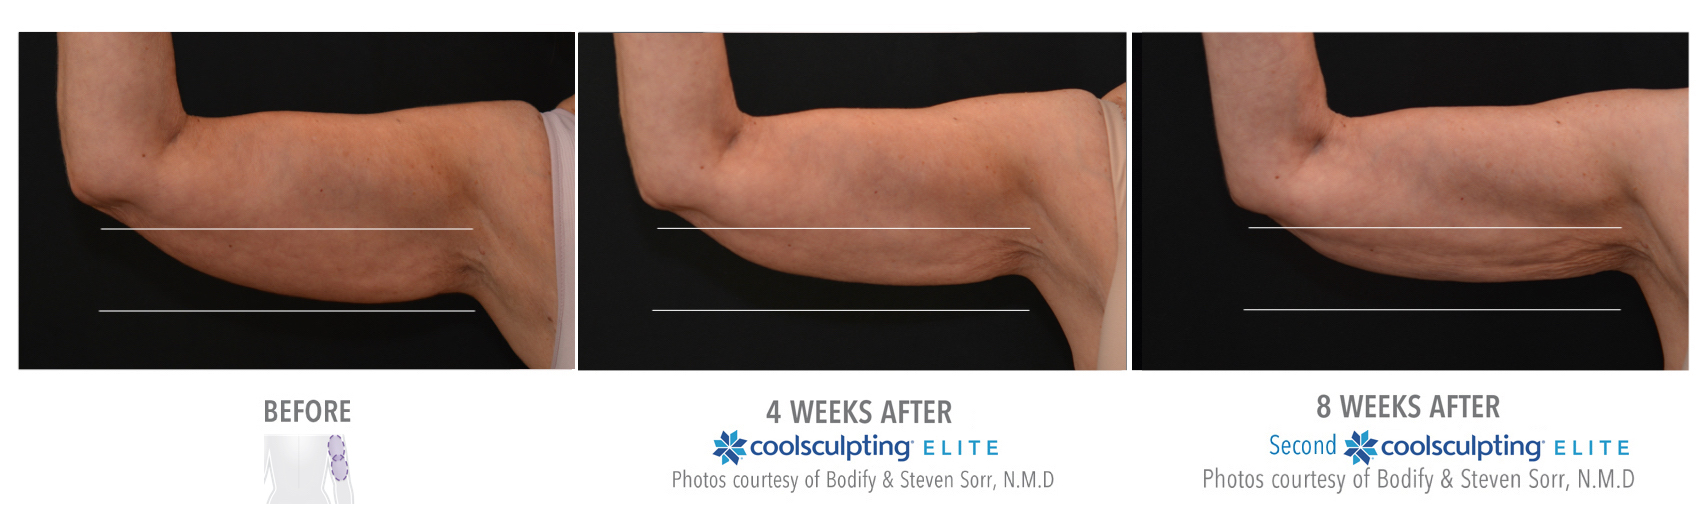 Coolsculpting Elite Treatment Results Before and After on a Female Upper Arms | Melindas Medical Spa & Salon in North Myrtle Beach, SC